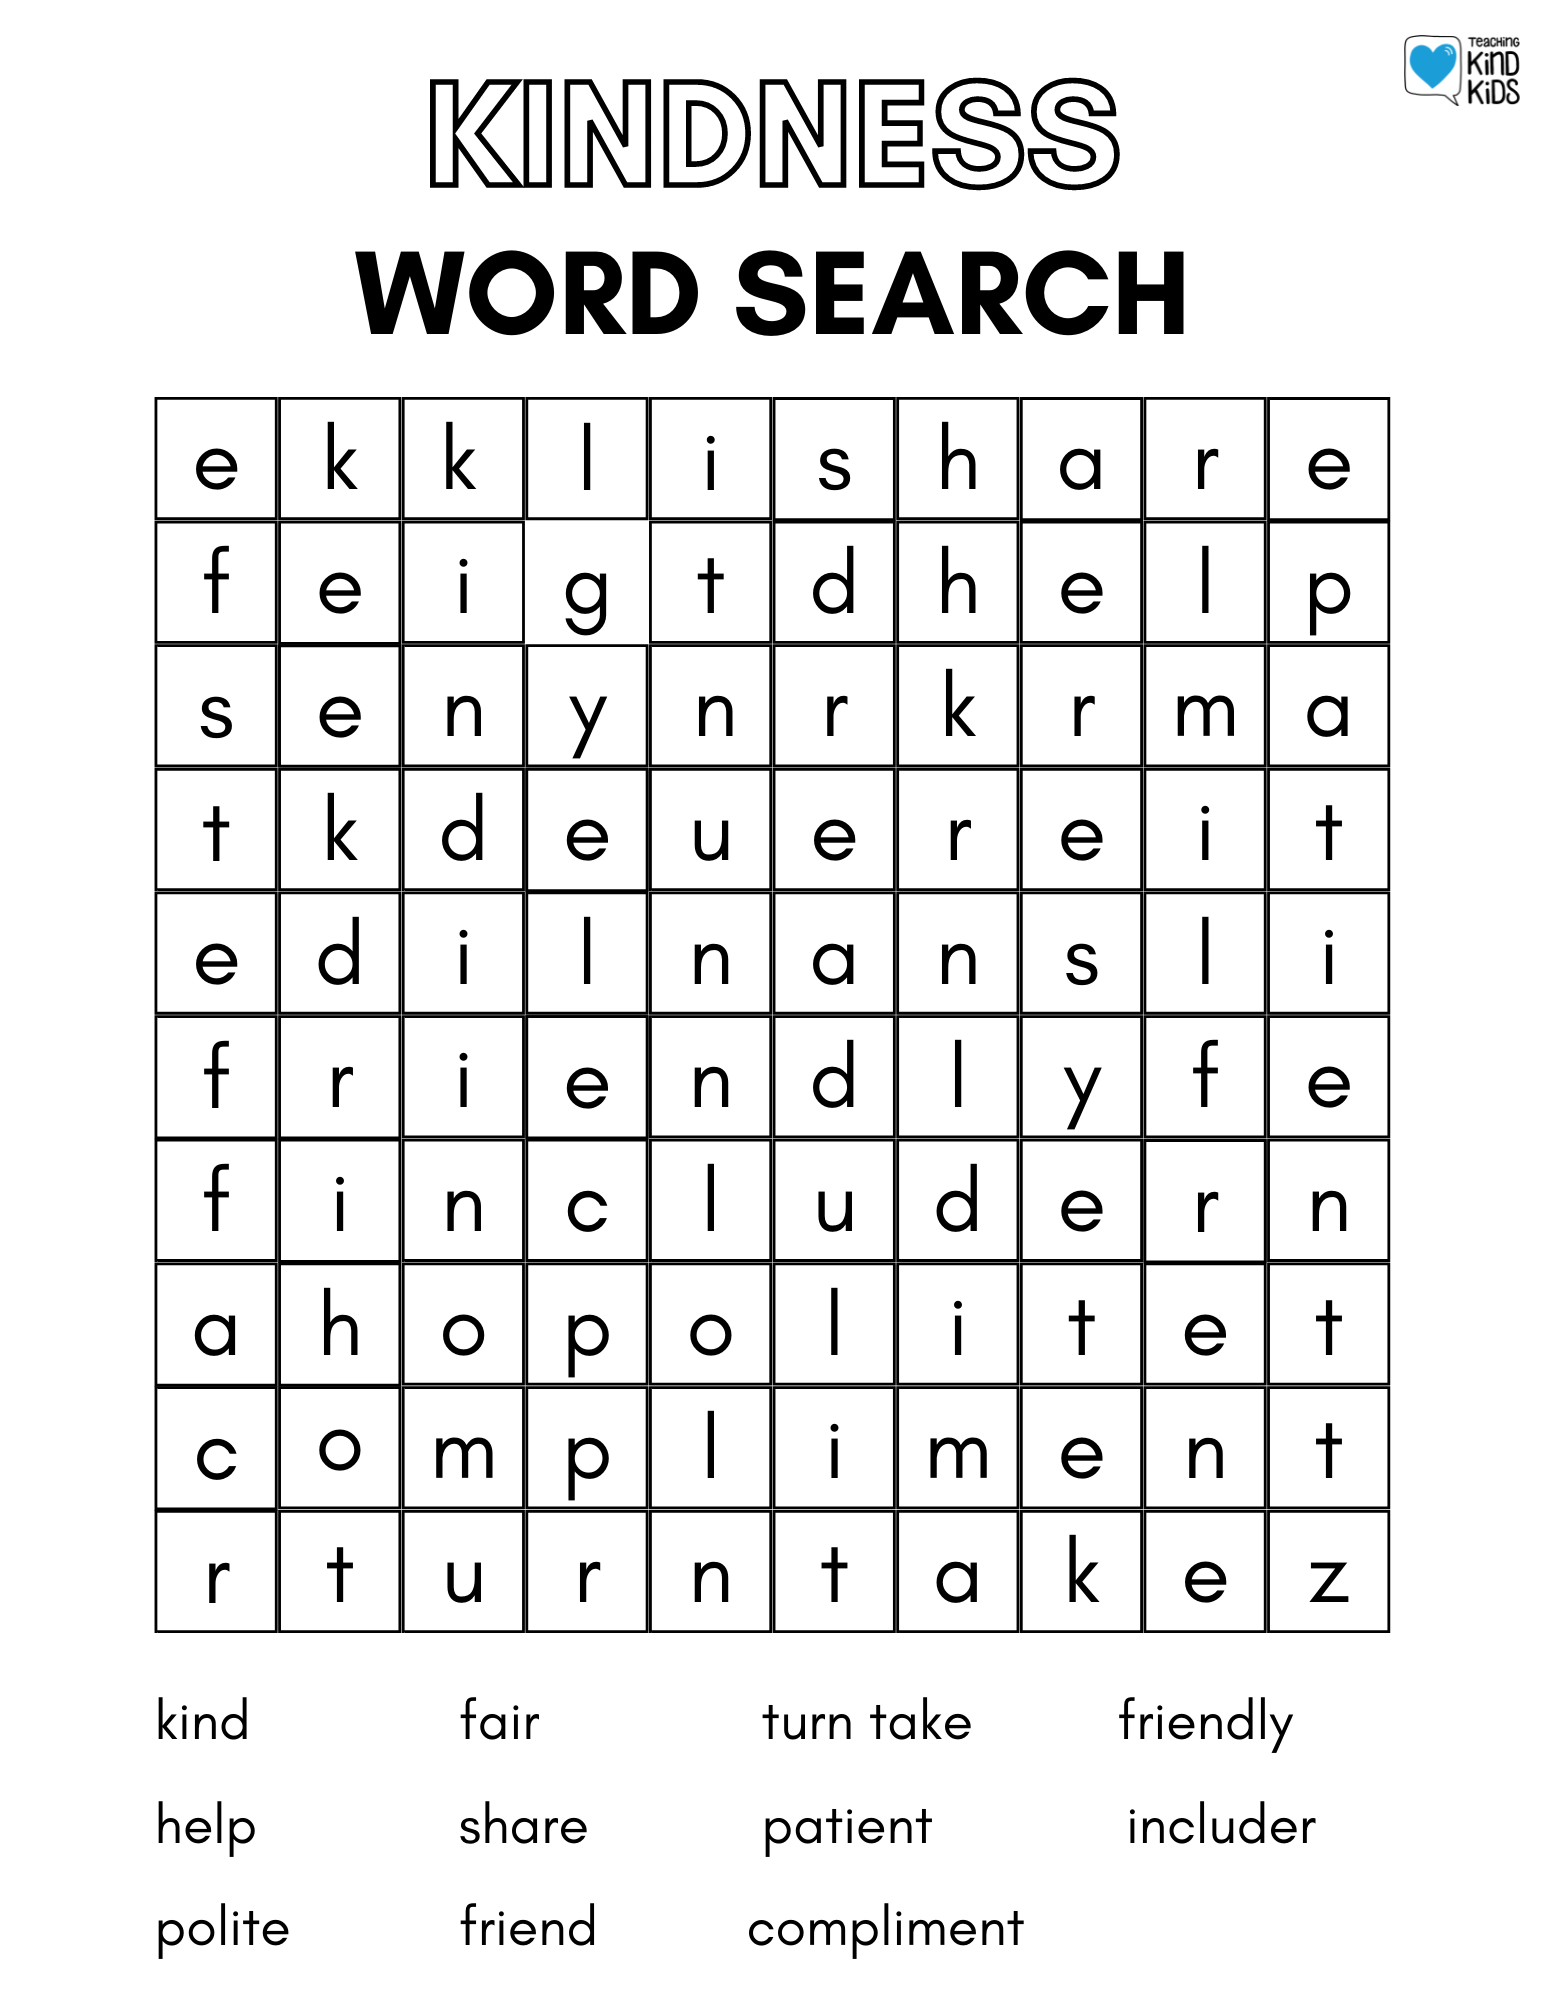 Kindness wordsearch is a fun way to reinforce sel concepts when teaching kindness. 